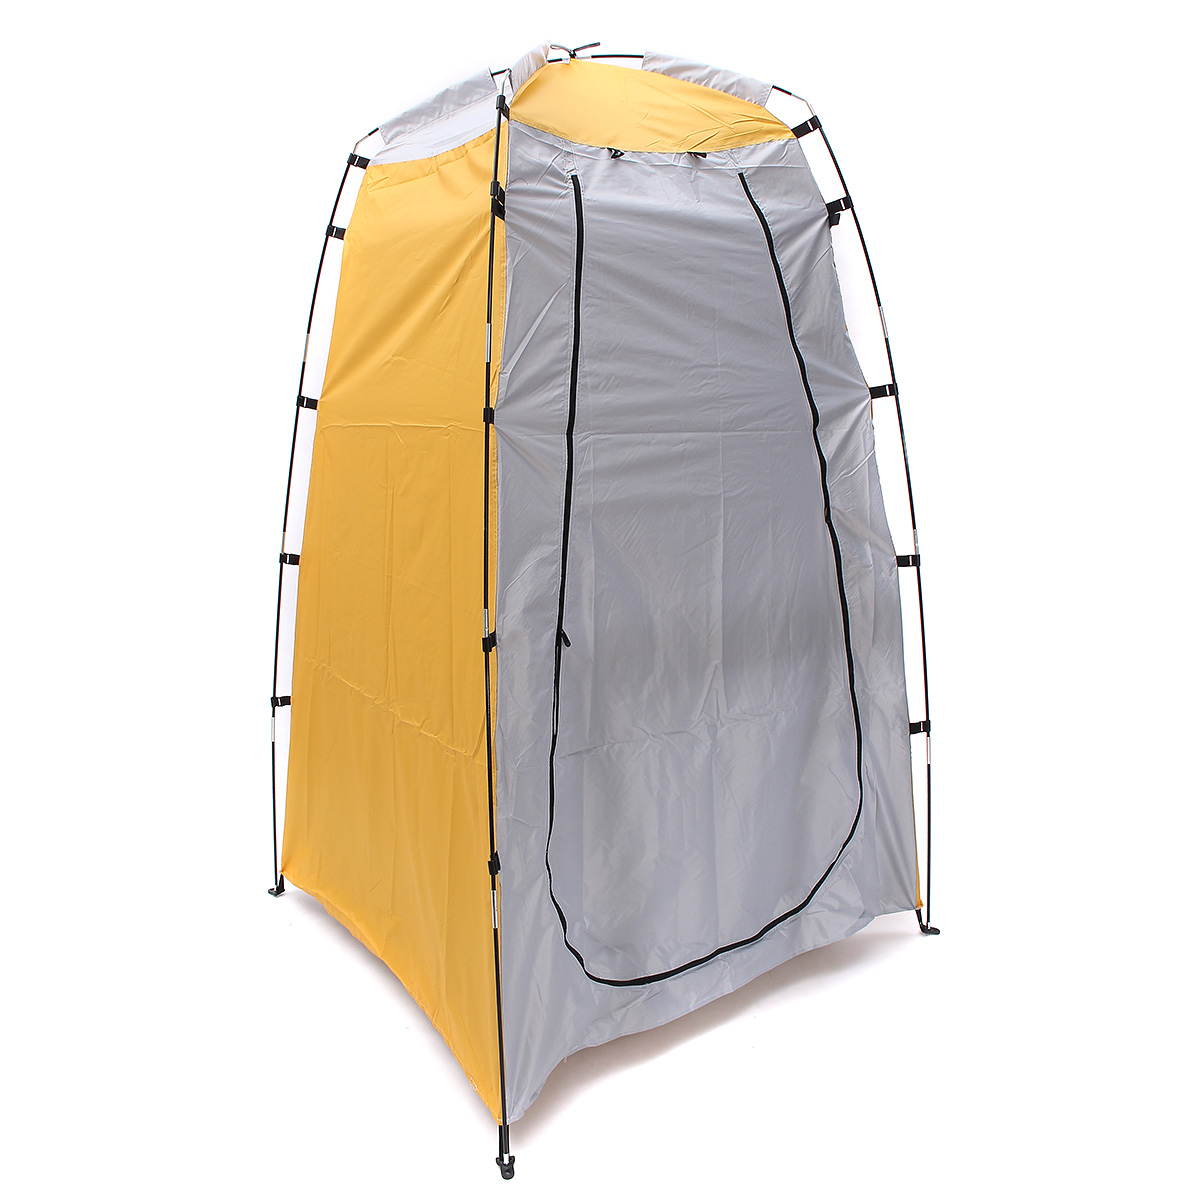 

IPRee™ Protable Pop Up Outdoor Privacy Tent Sunshade Dressing Changing Room Mobile Toilet Shelter Camping Travel Emergency Canopy